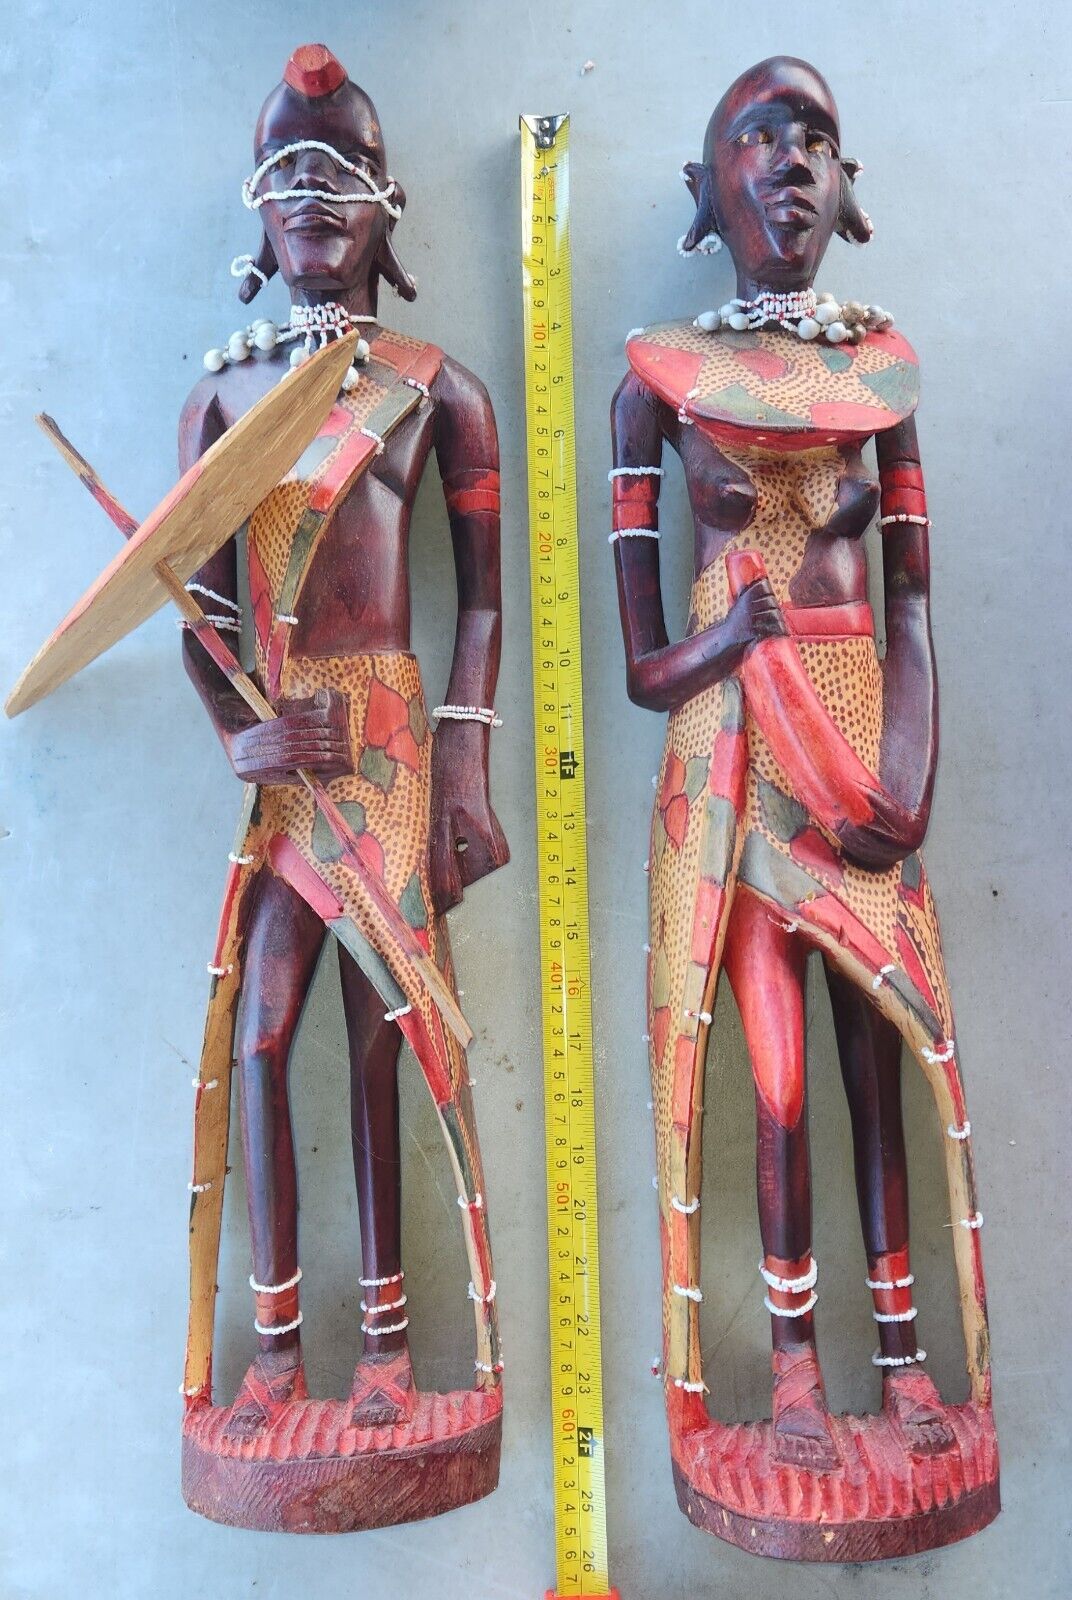 2 pcs Hand Carved Wooden African Tribal Figures 26” MAN & WOMAN 